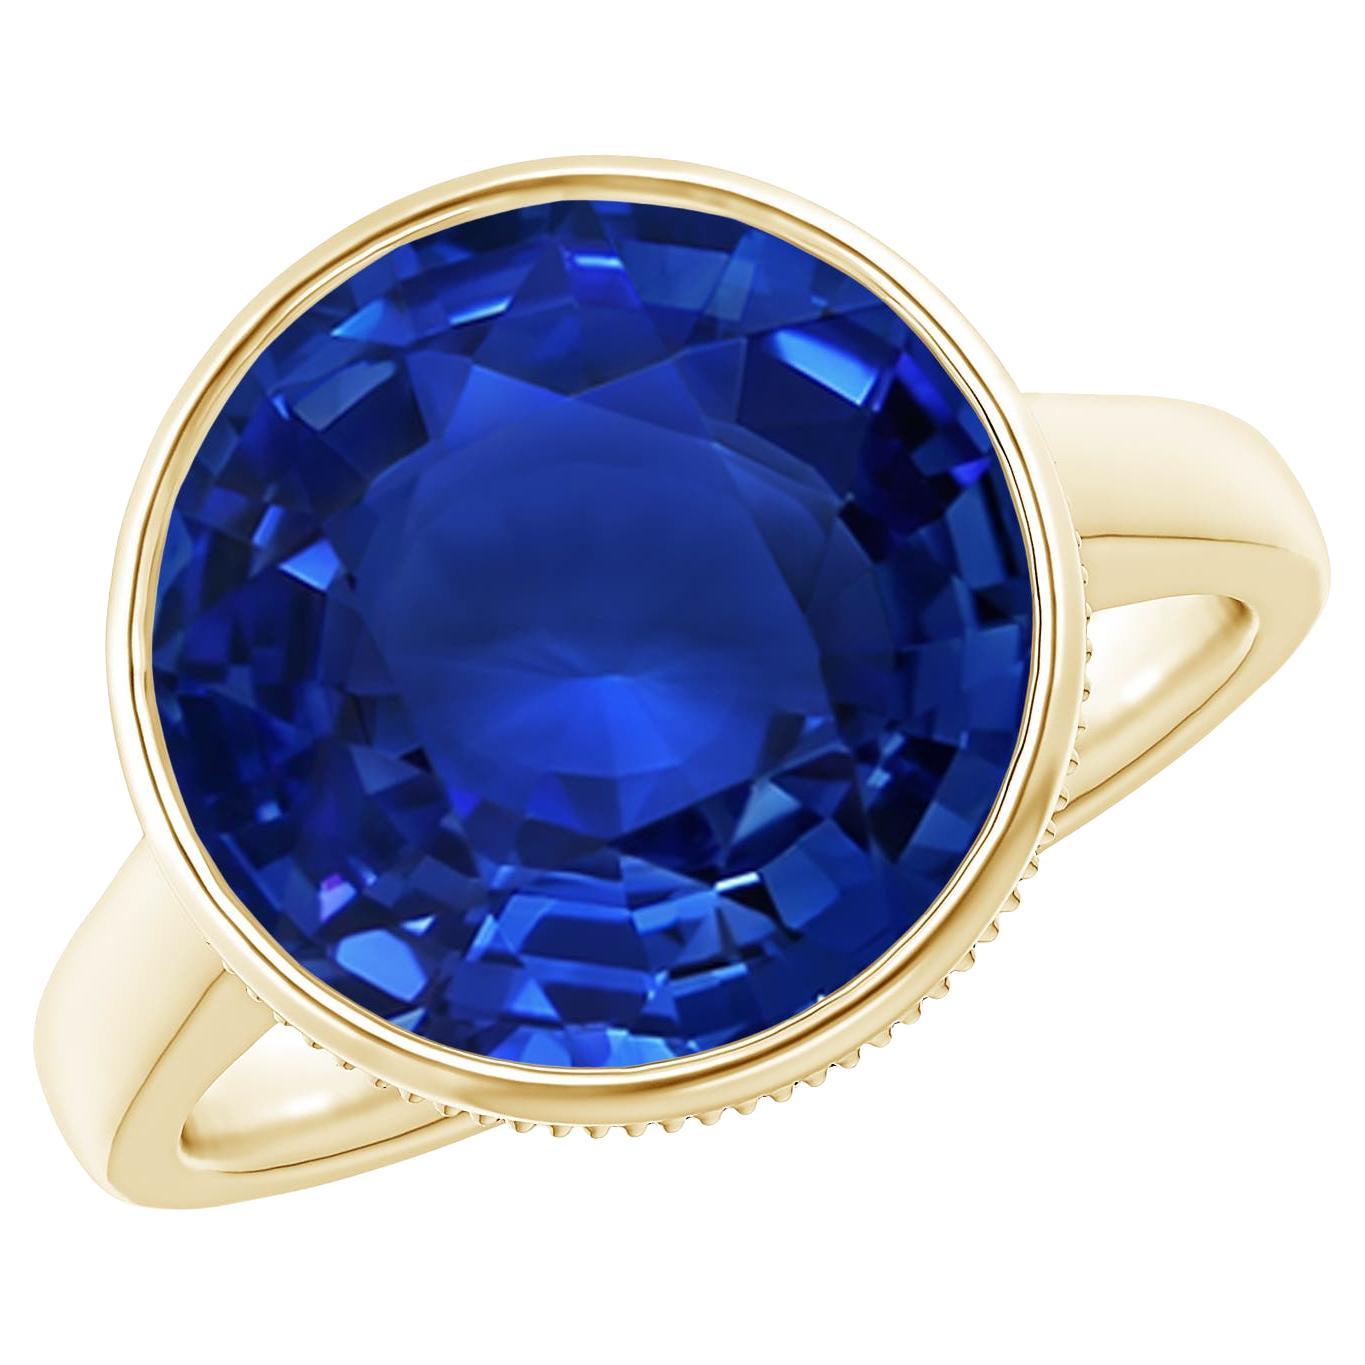 For Sale:  Angara GIA Certified Natural Ceylon Sapphire Solitaire Ring in Yellow Gold